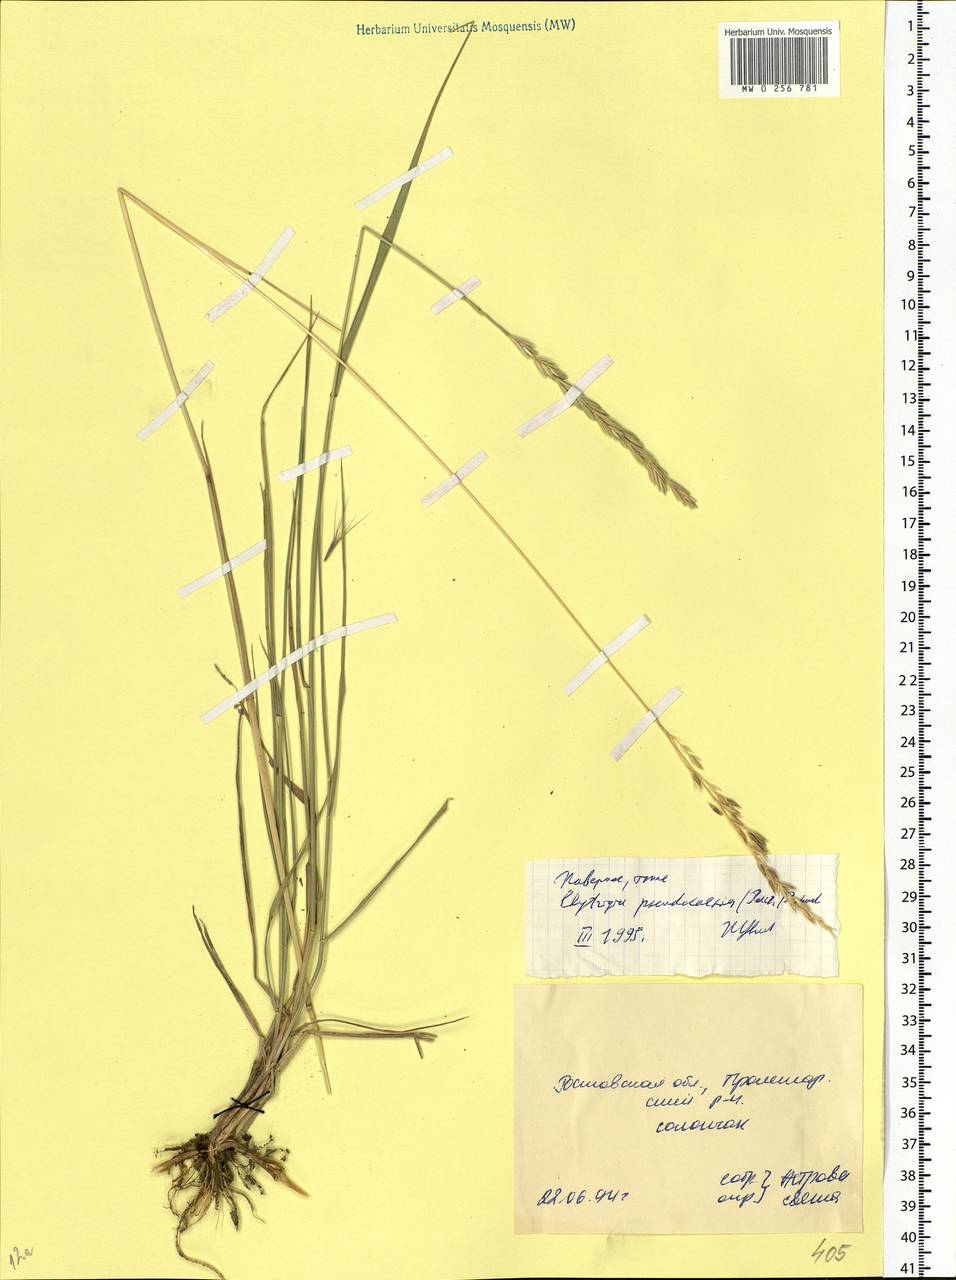 Elymus repens subsp. repens, Eastern Europe, Rostov Oblast (E12a) (Russia)